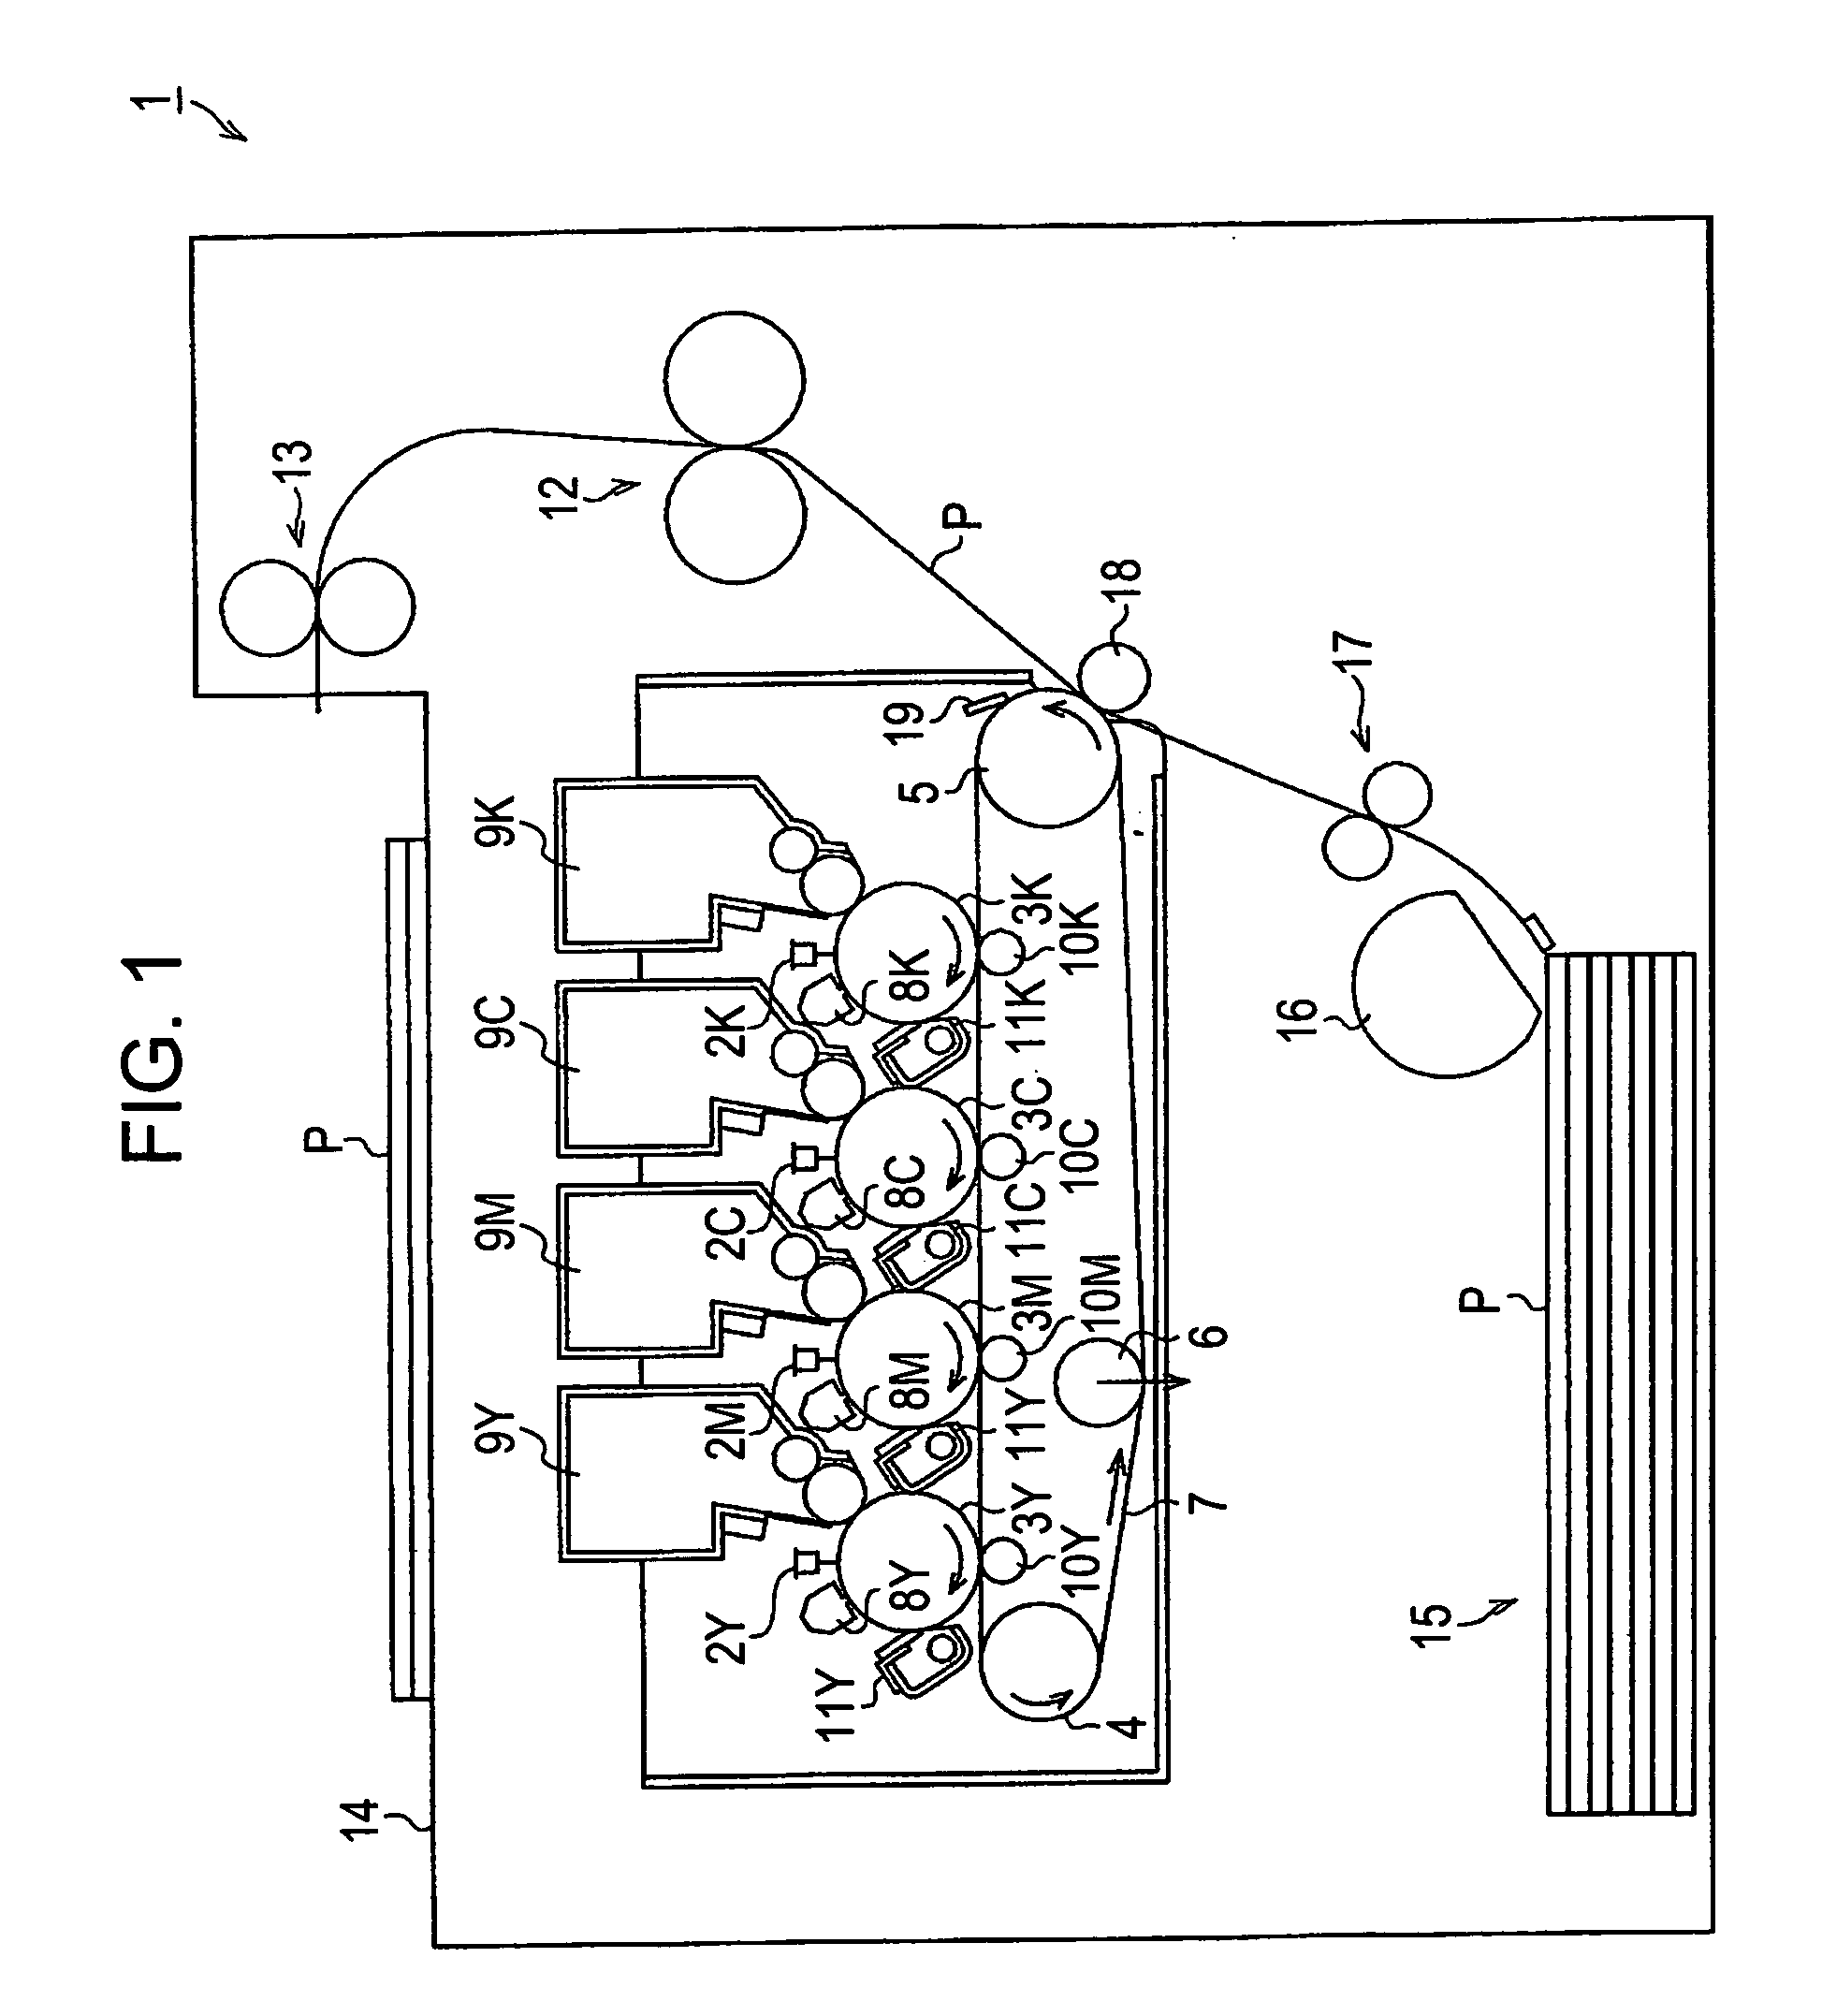 Electrooptical apparatus and method of manufacturing electrooptical apparatus